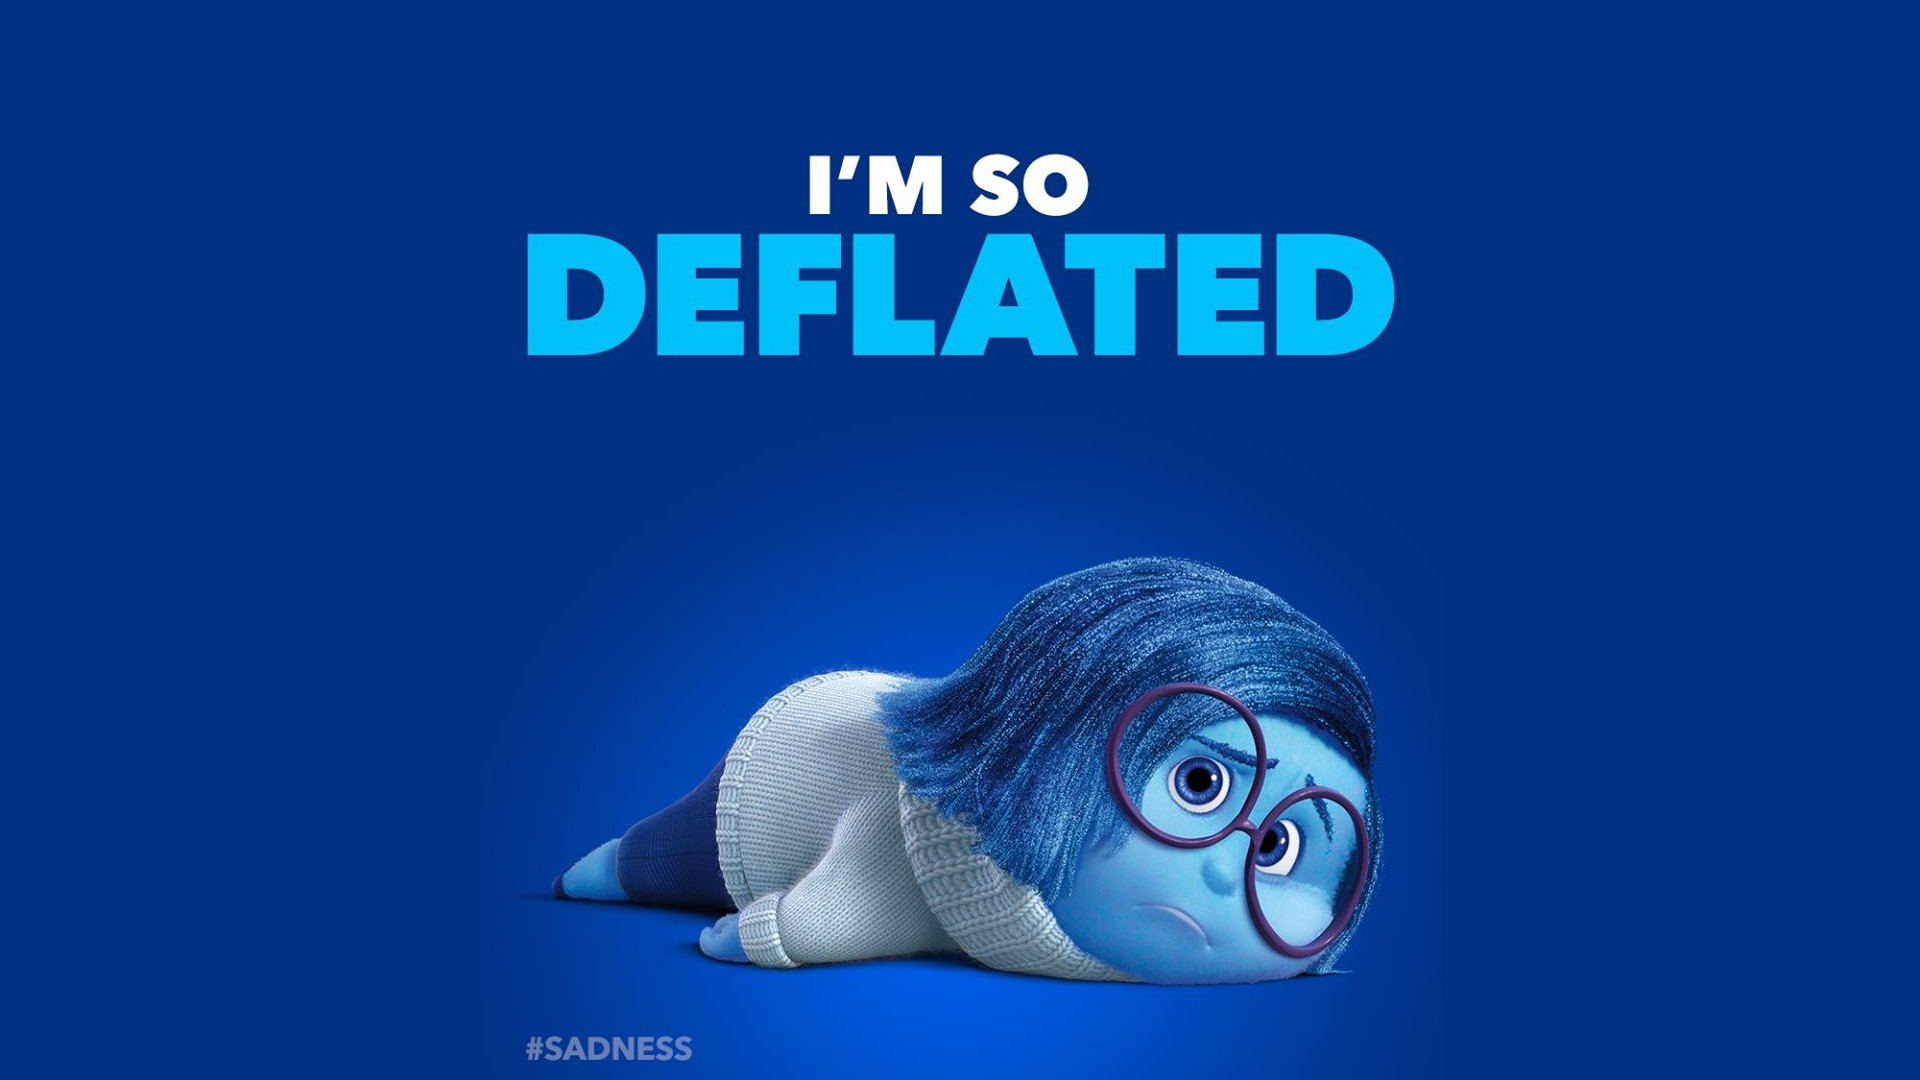 Sadness Quotes Inside Out
 How the Movie Inside Out Will Inspire You – Cassiah Jay